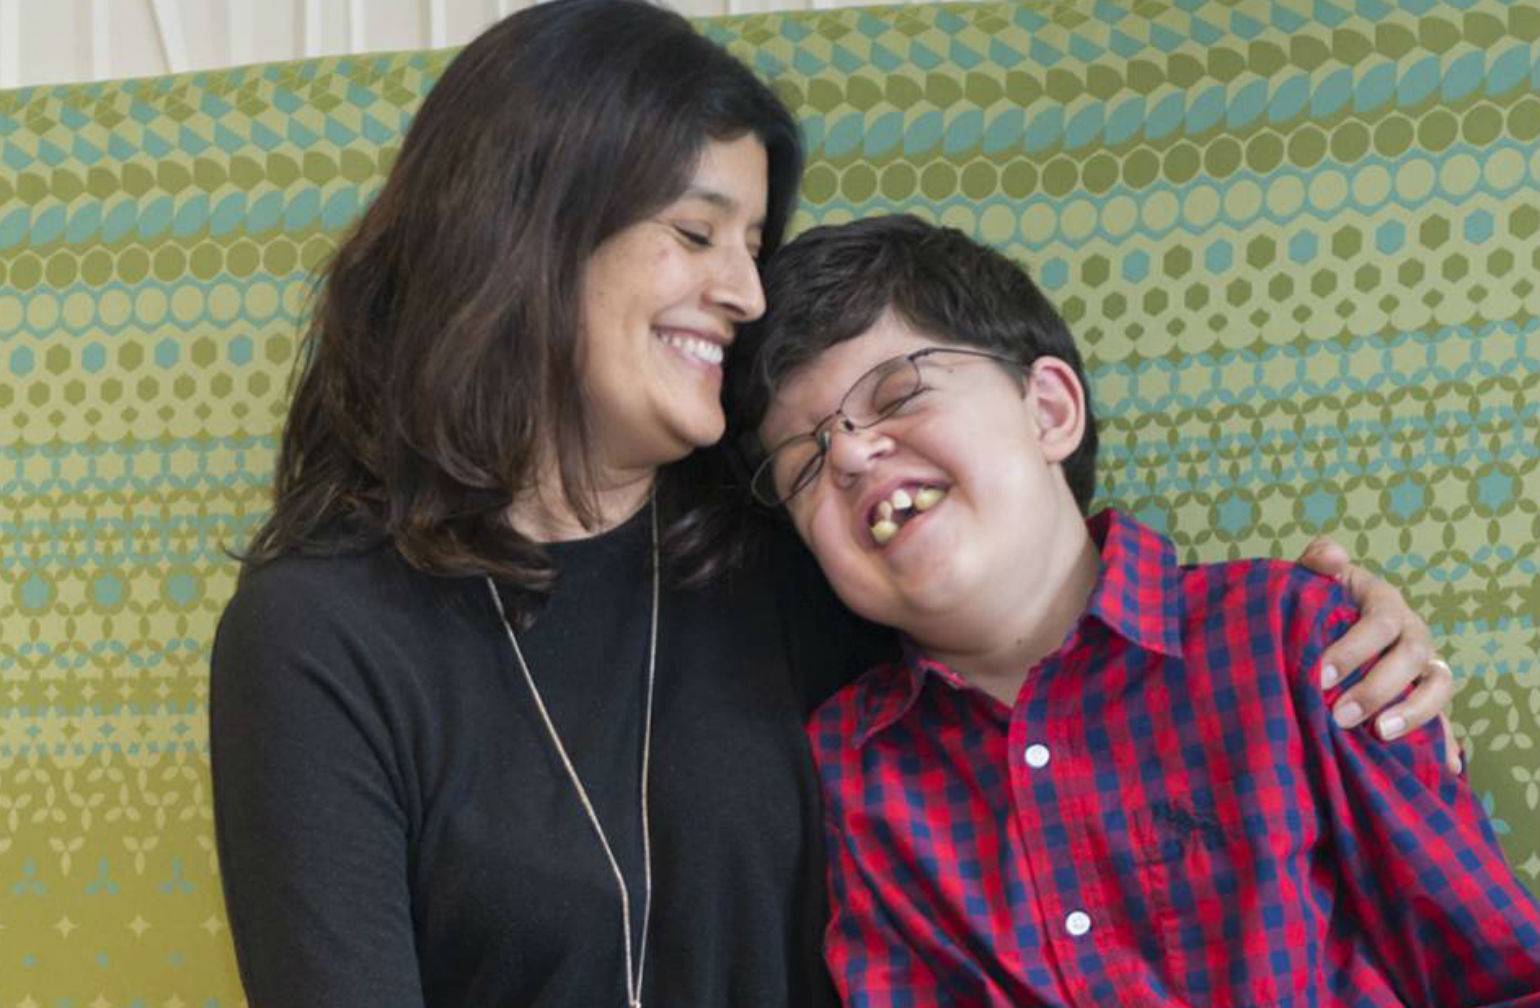 Gillette patient Michael with his mom